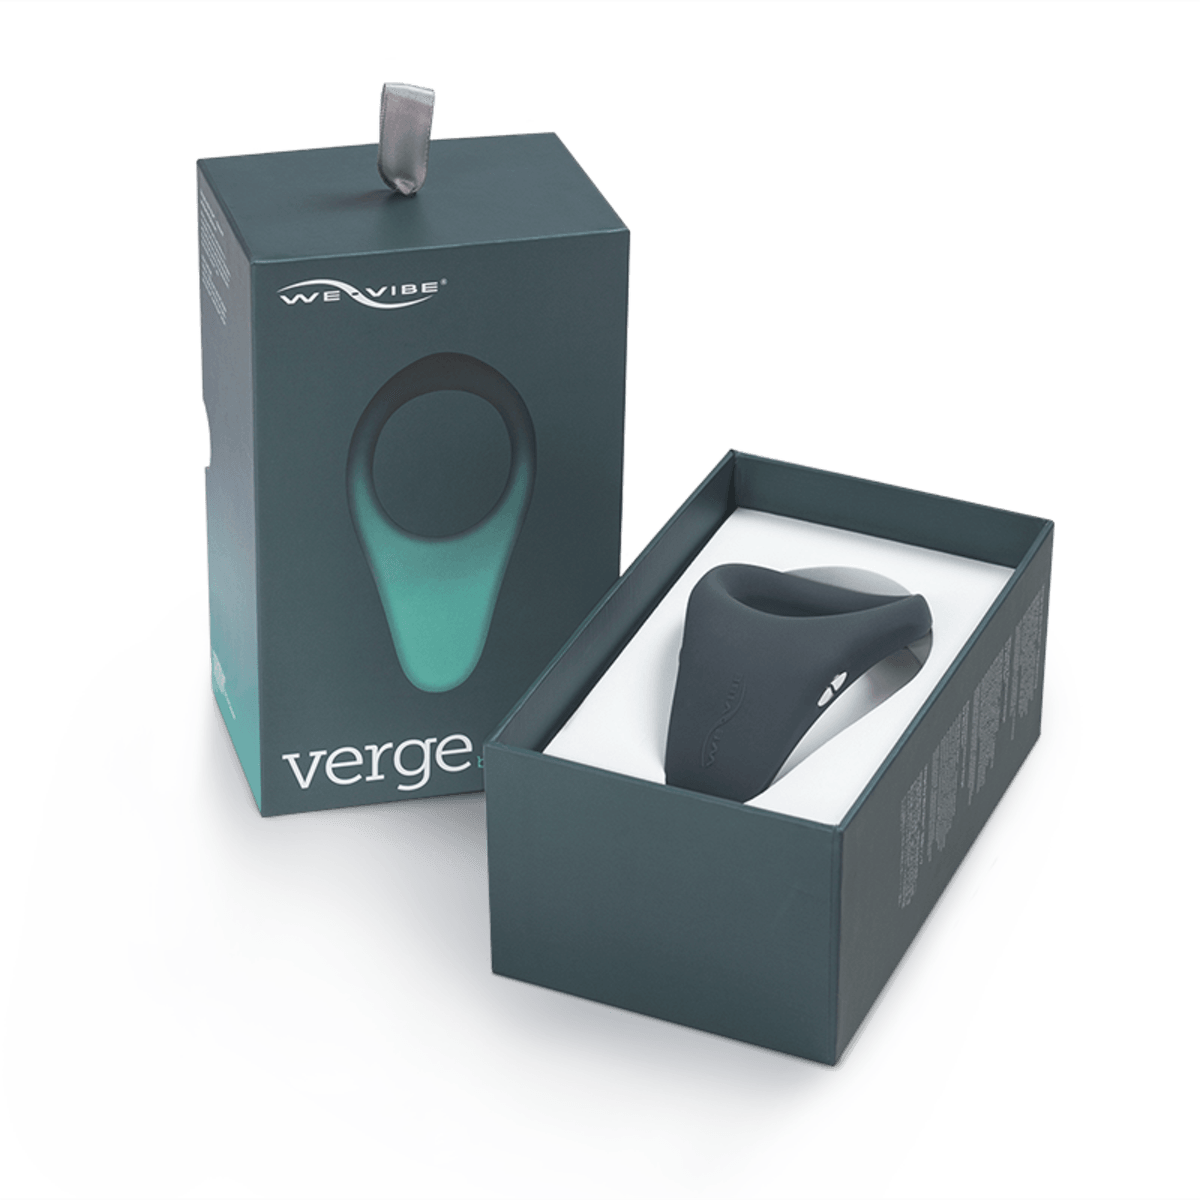 Verge by We-Vibe: Vibrating Erection Ring - App Controlled - Passionfruit